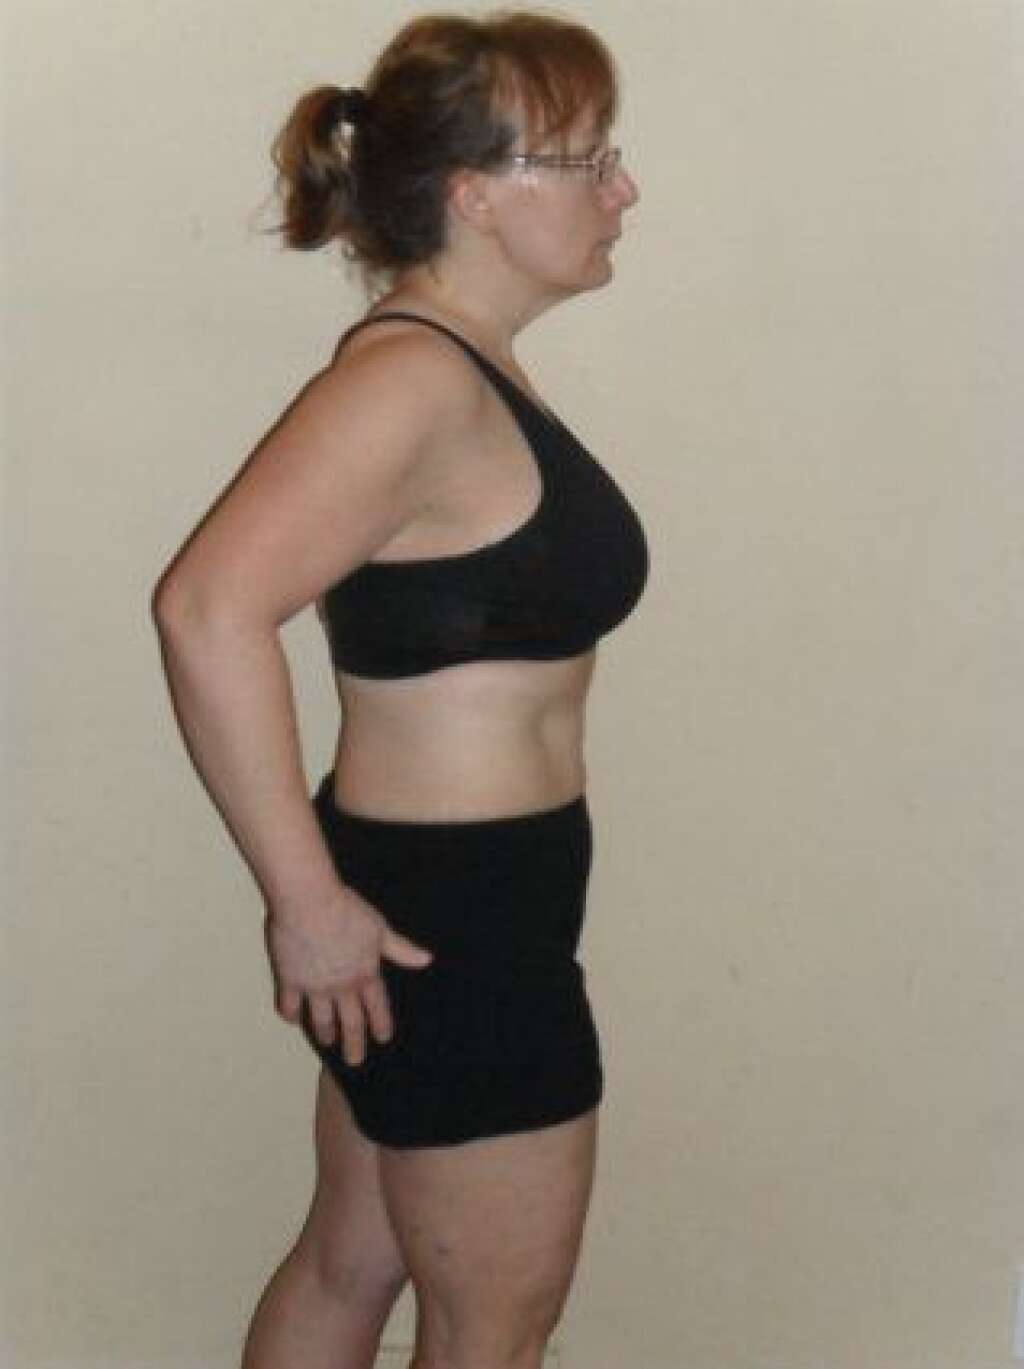 Teresa AFTER - <a href="http://www.huffingtonpost.ca/2014/08/26/weight-lost_n_5715169.html?utm_hp_ref=weight-lost" target="_blank">Read the story here.</a>